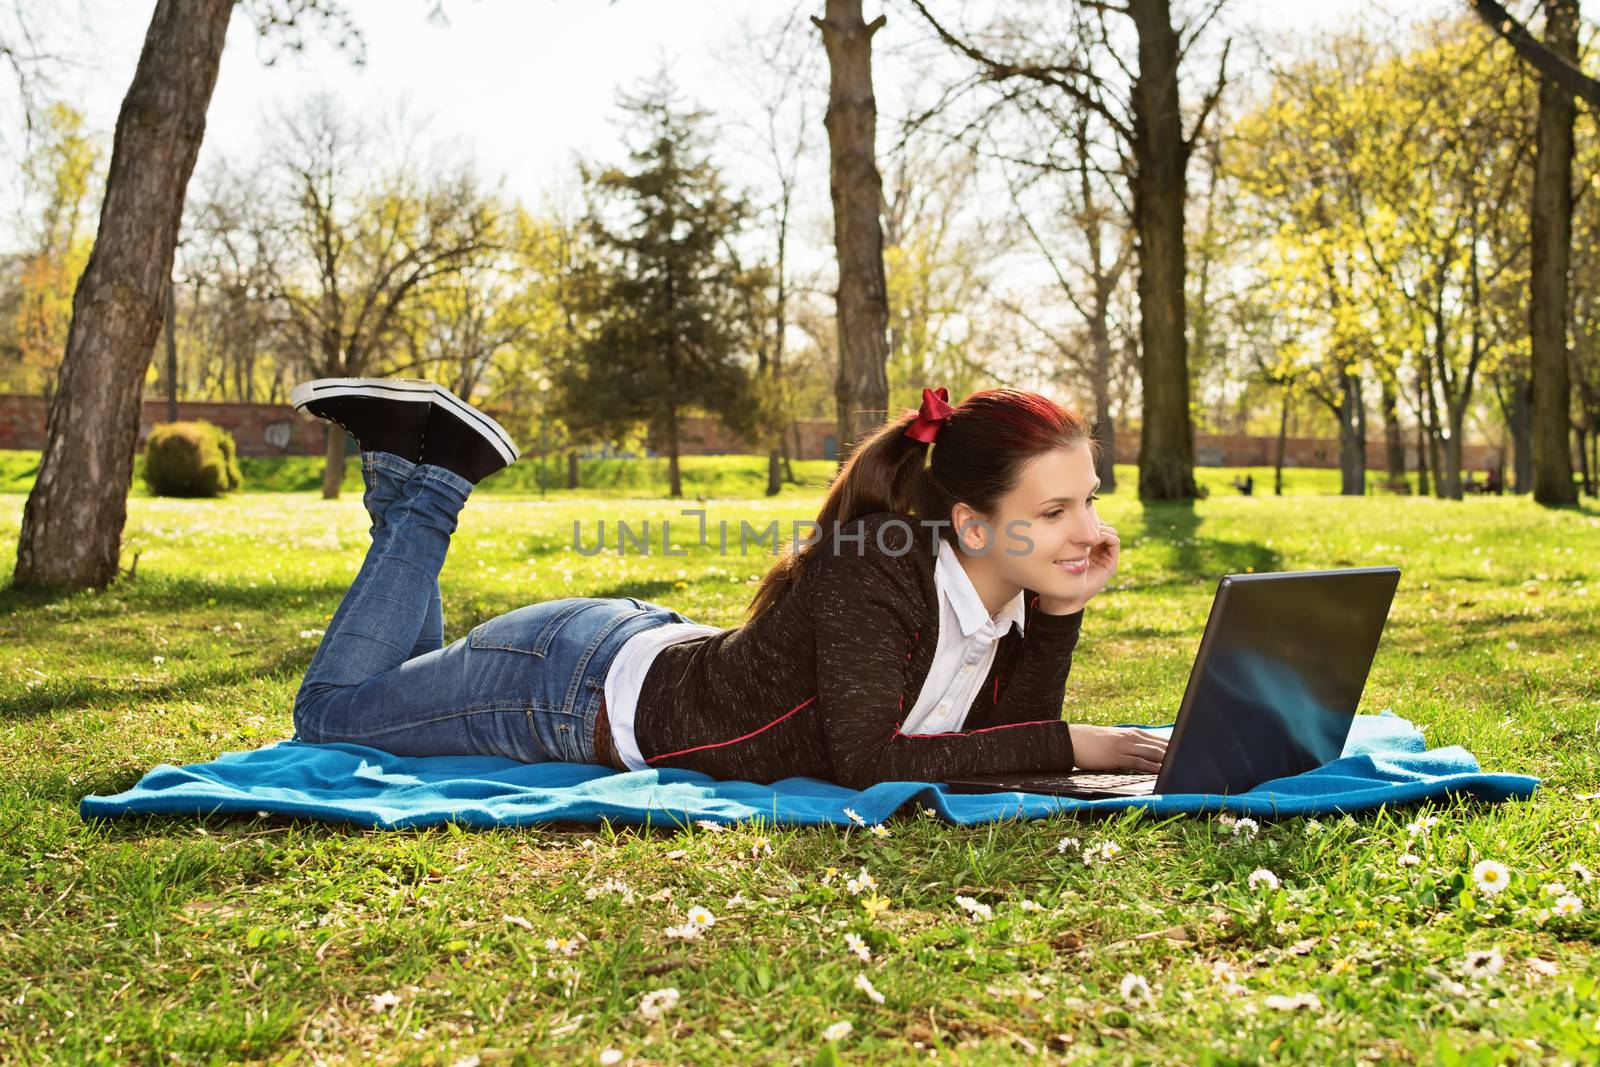 Beautiful casual student girl with laptop outdoors. Smiling woman lying on a blanket on the grass with computer, surfing on the Internet or preparing for exams. Technology, education and remote working concept.

